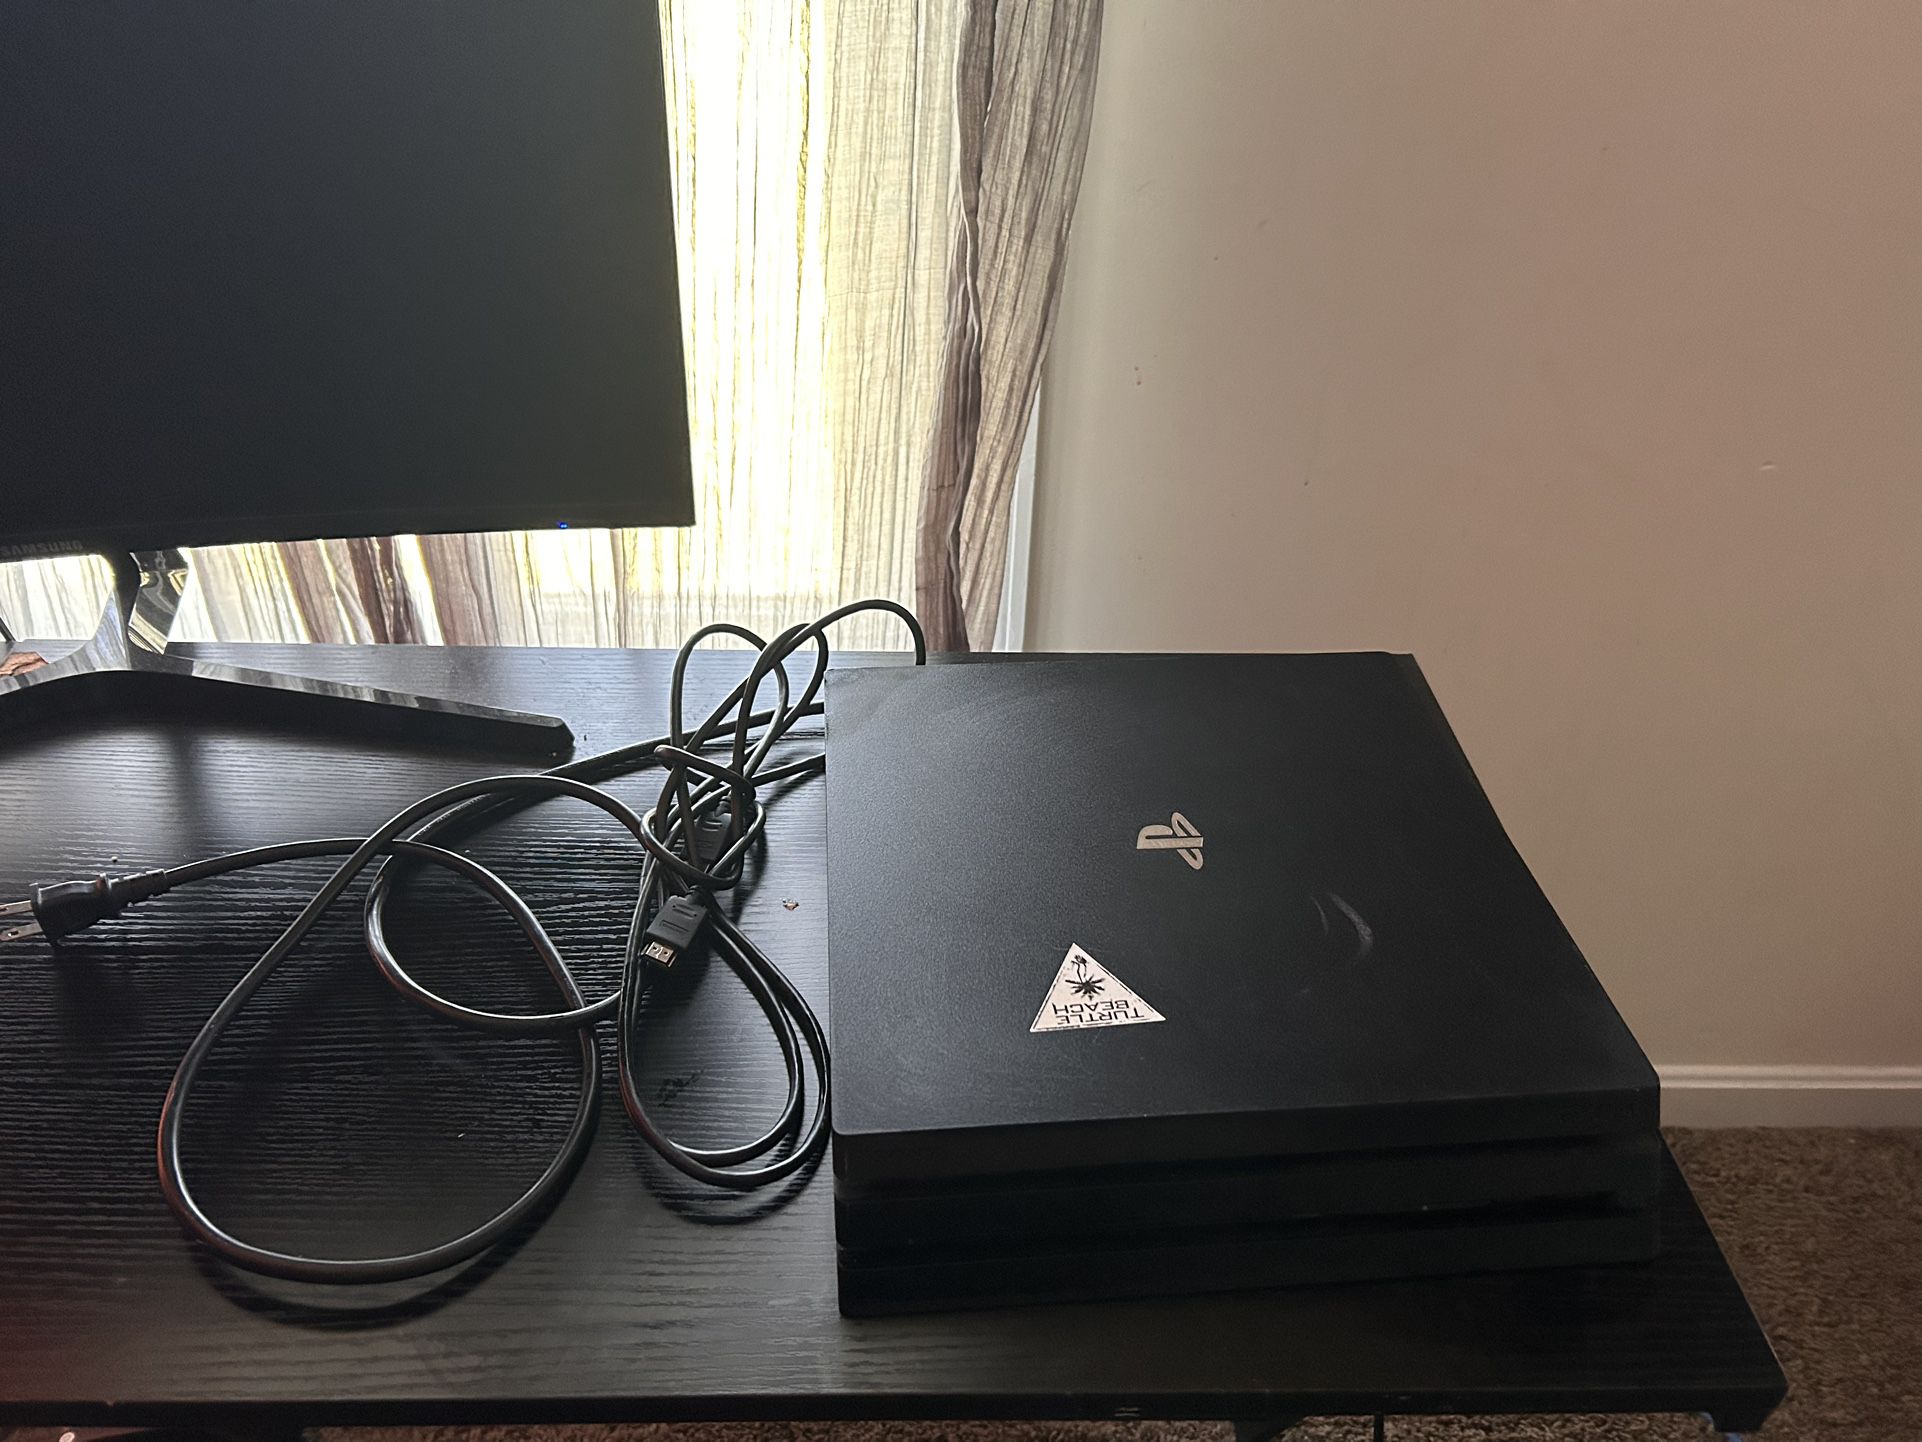 PS4 Pro With Power Cord And HDMI 